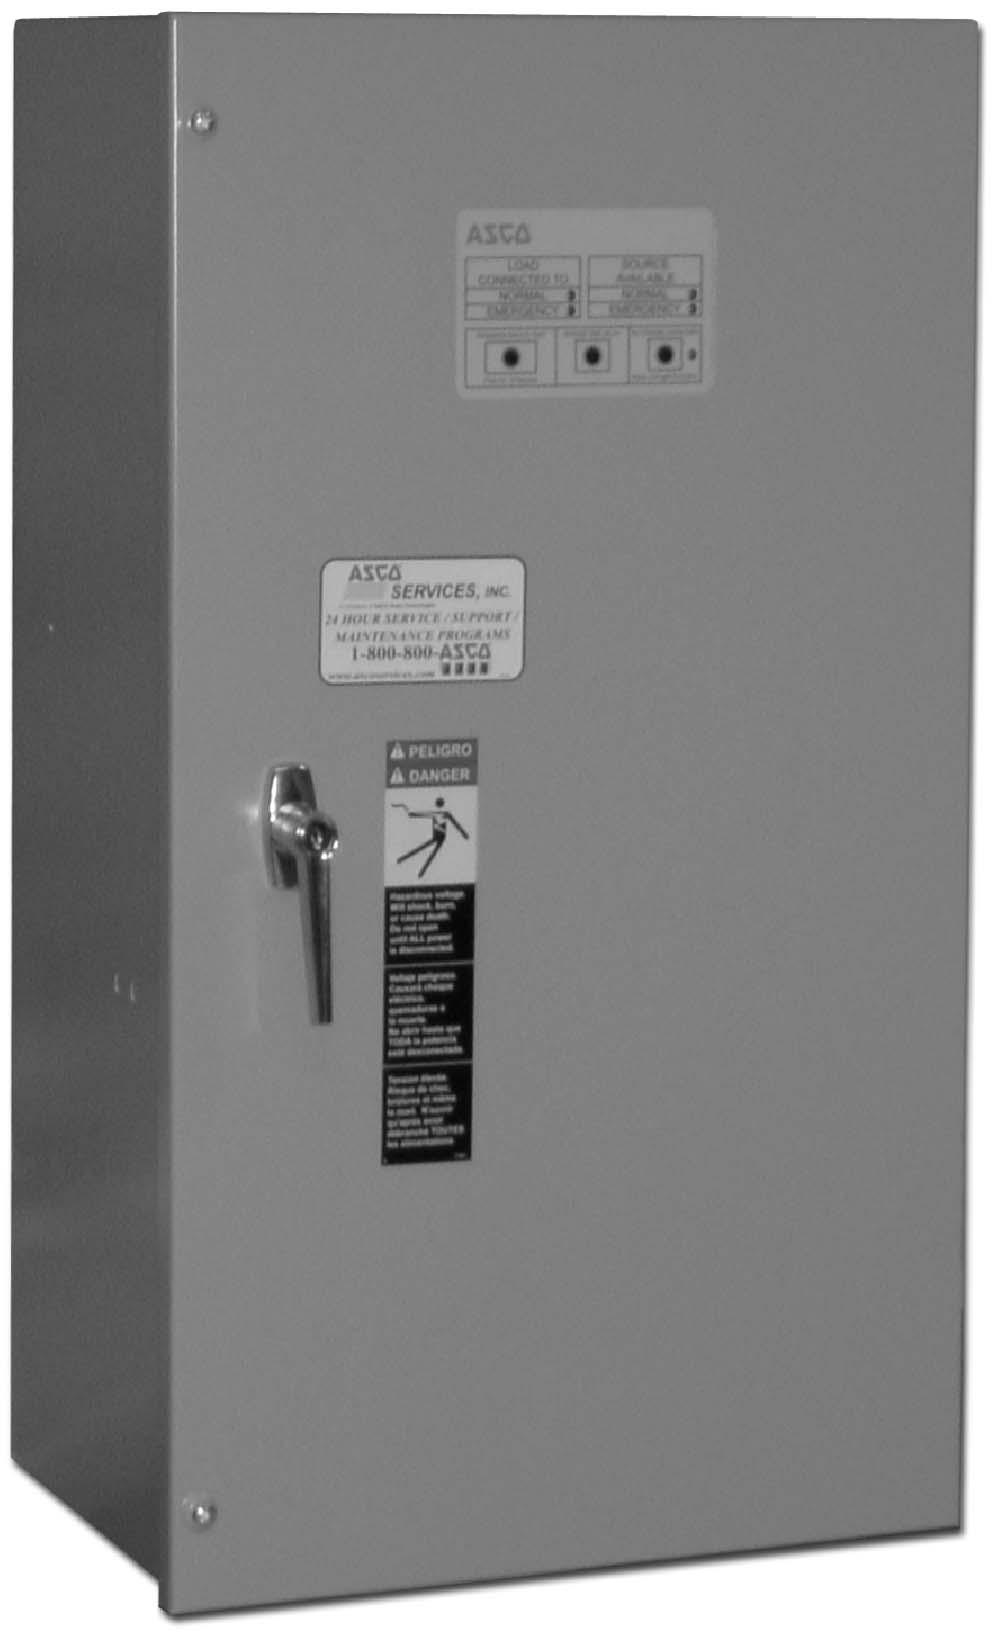 Refer to the outline and wiring drawings provided with your ASCO Series 300 ATS for all installation details.